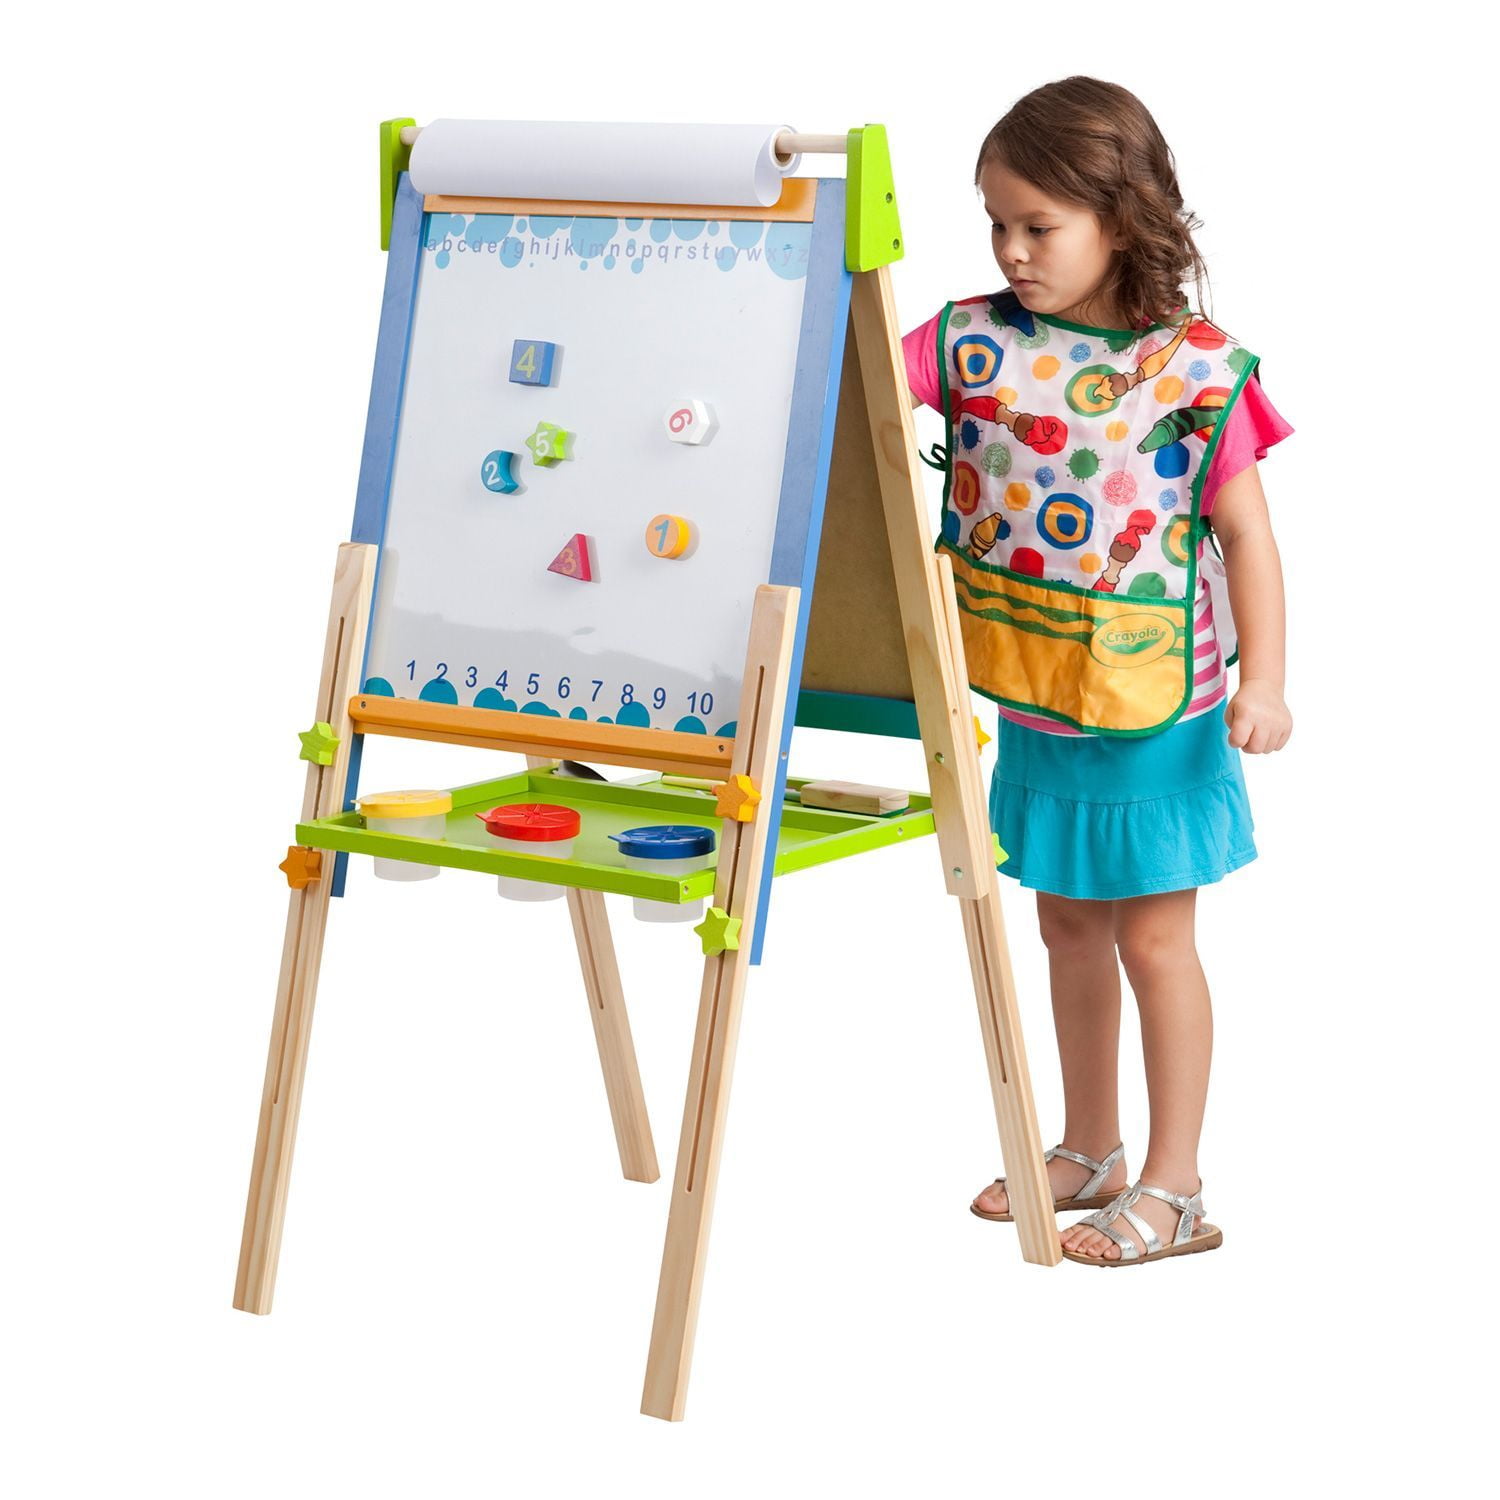 Grandink Pre Printed Canvas Easel for Kids Painting Art kit Ready